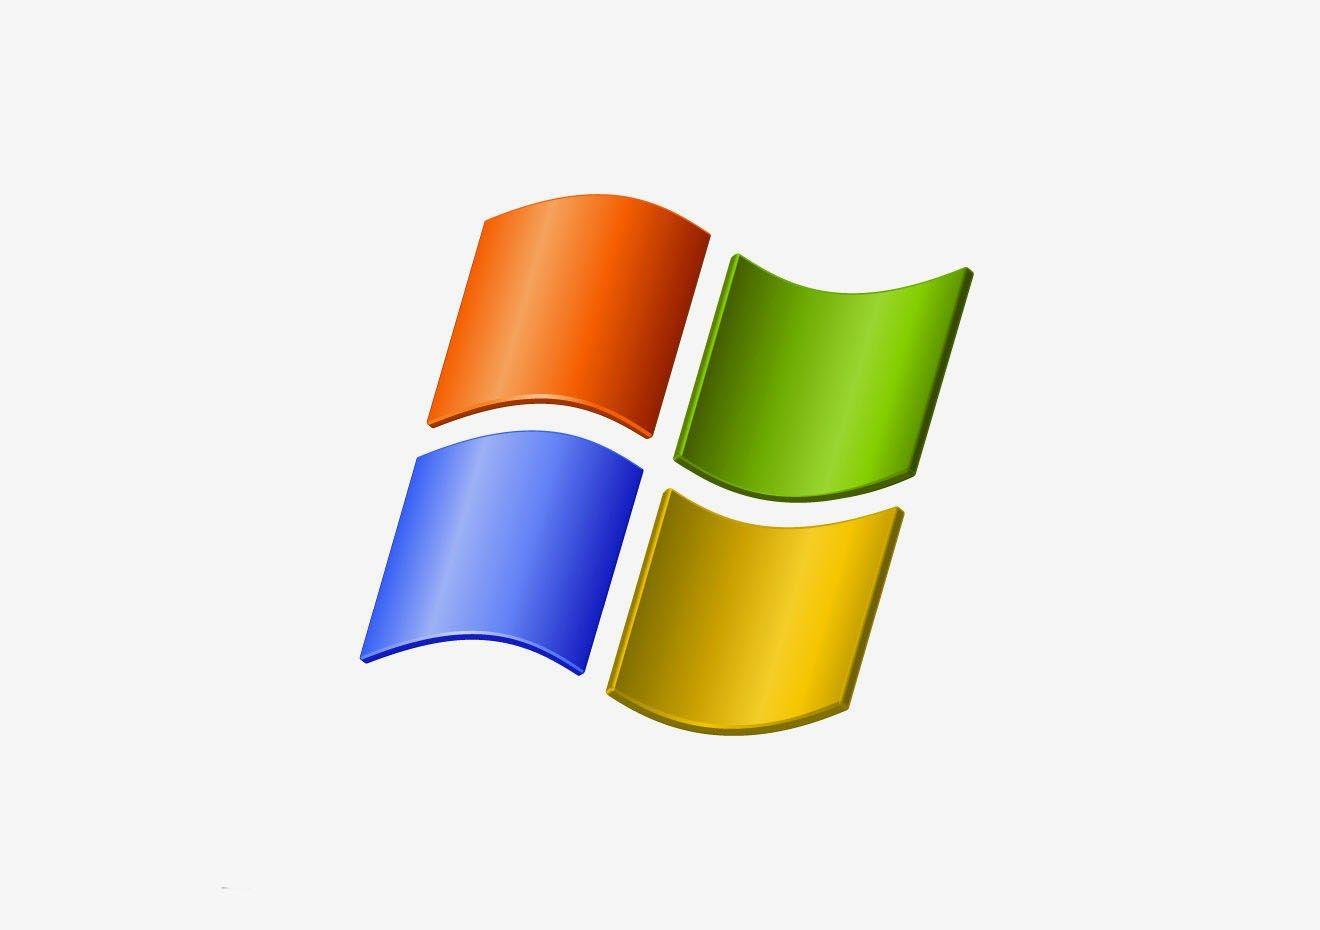 Oldest Microsoft Windows Logo - Windows XP Makes Ransomware and Other Threats So Much Worse | WIRED